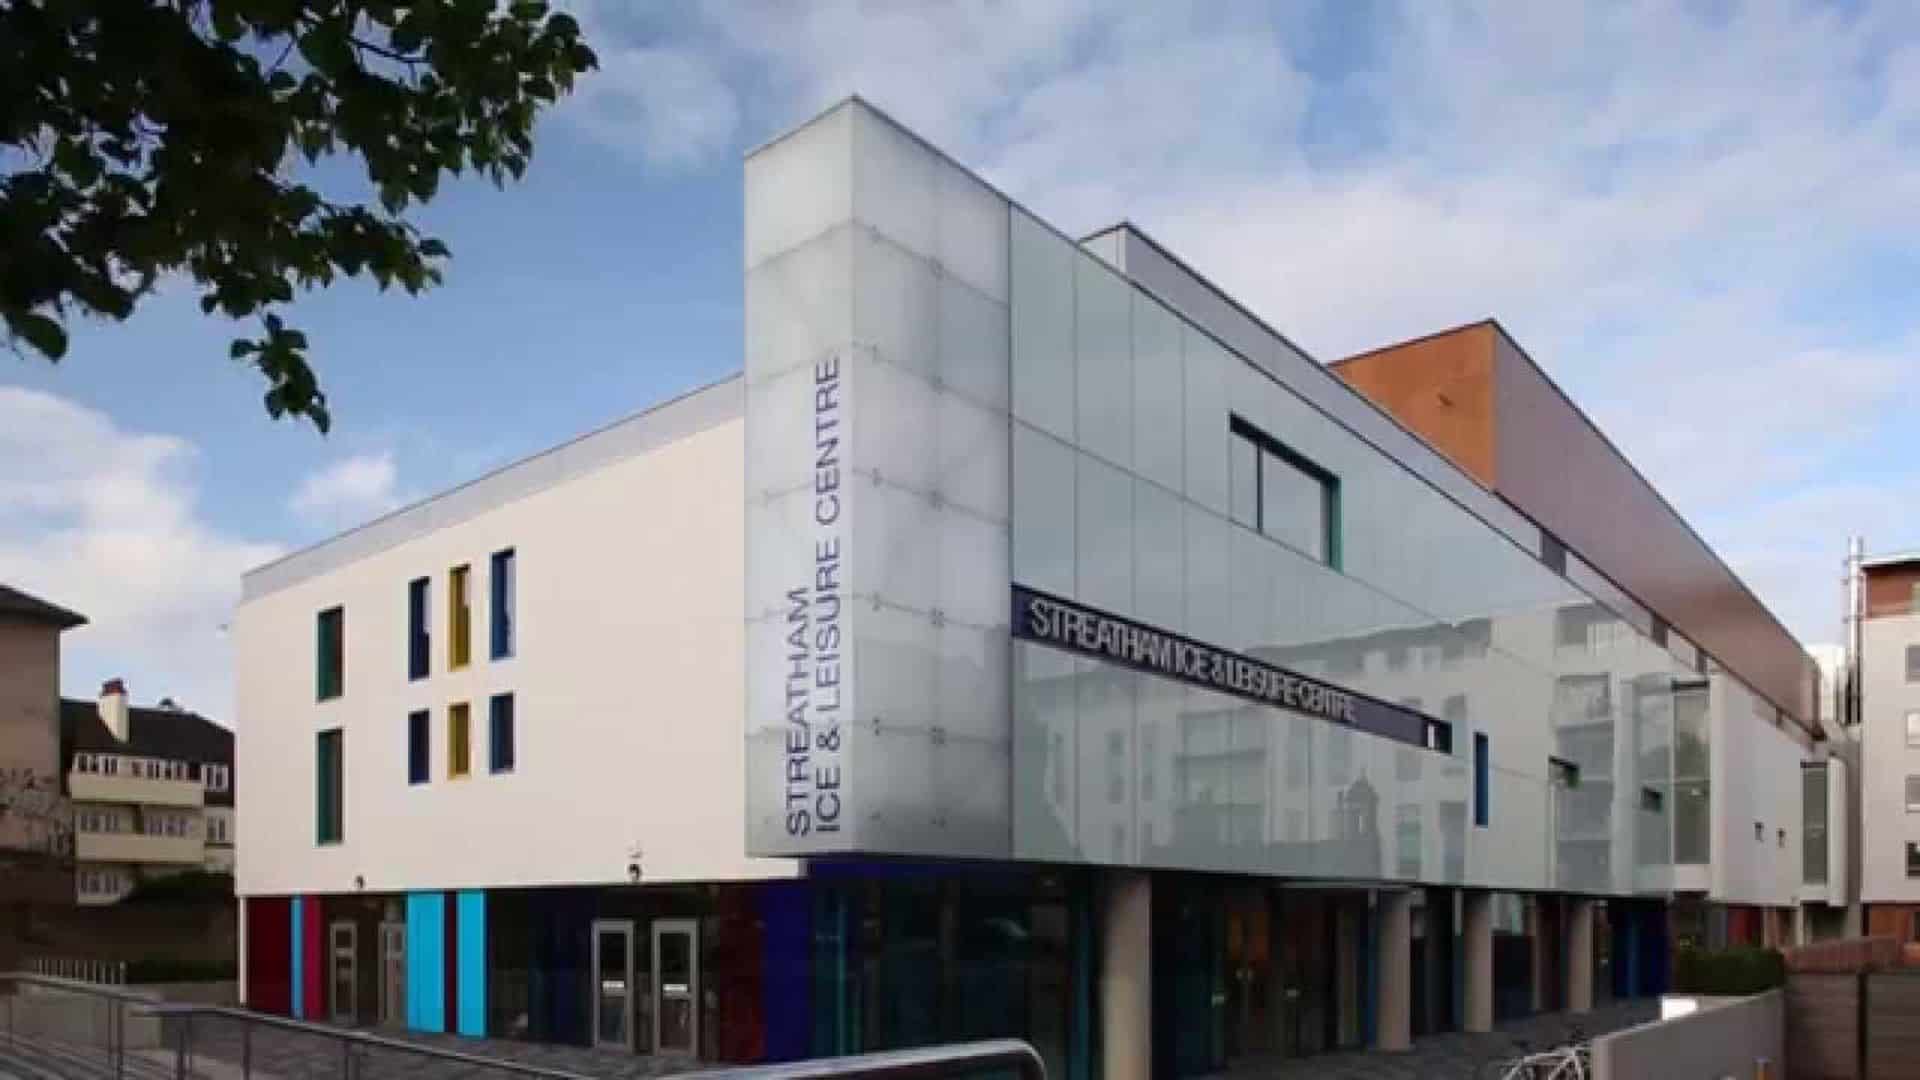 Streatham Ice and Leisure Centre in UK